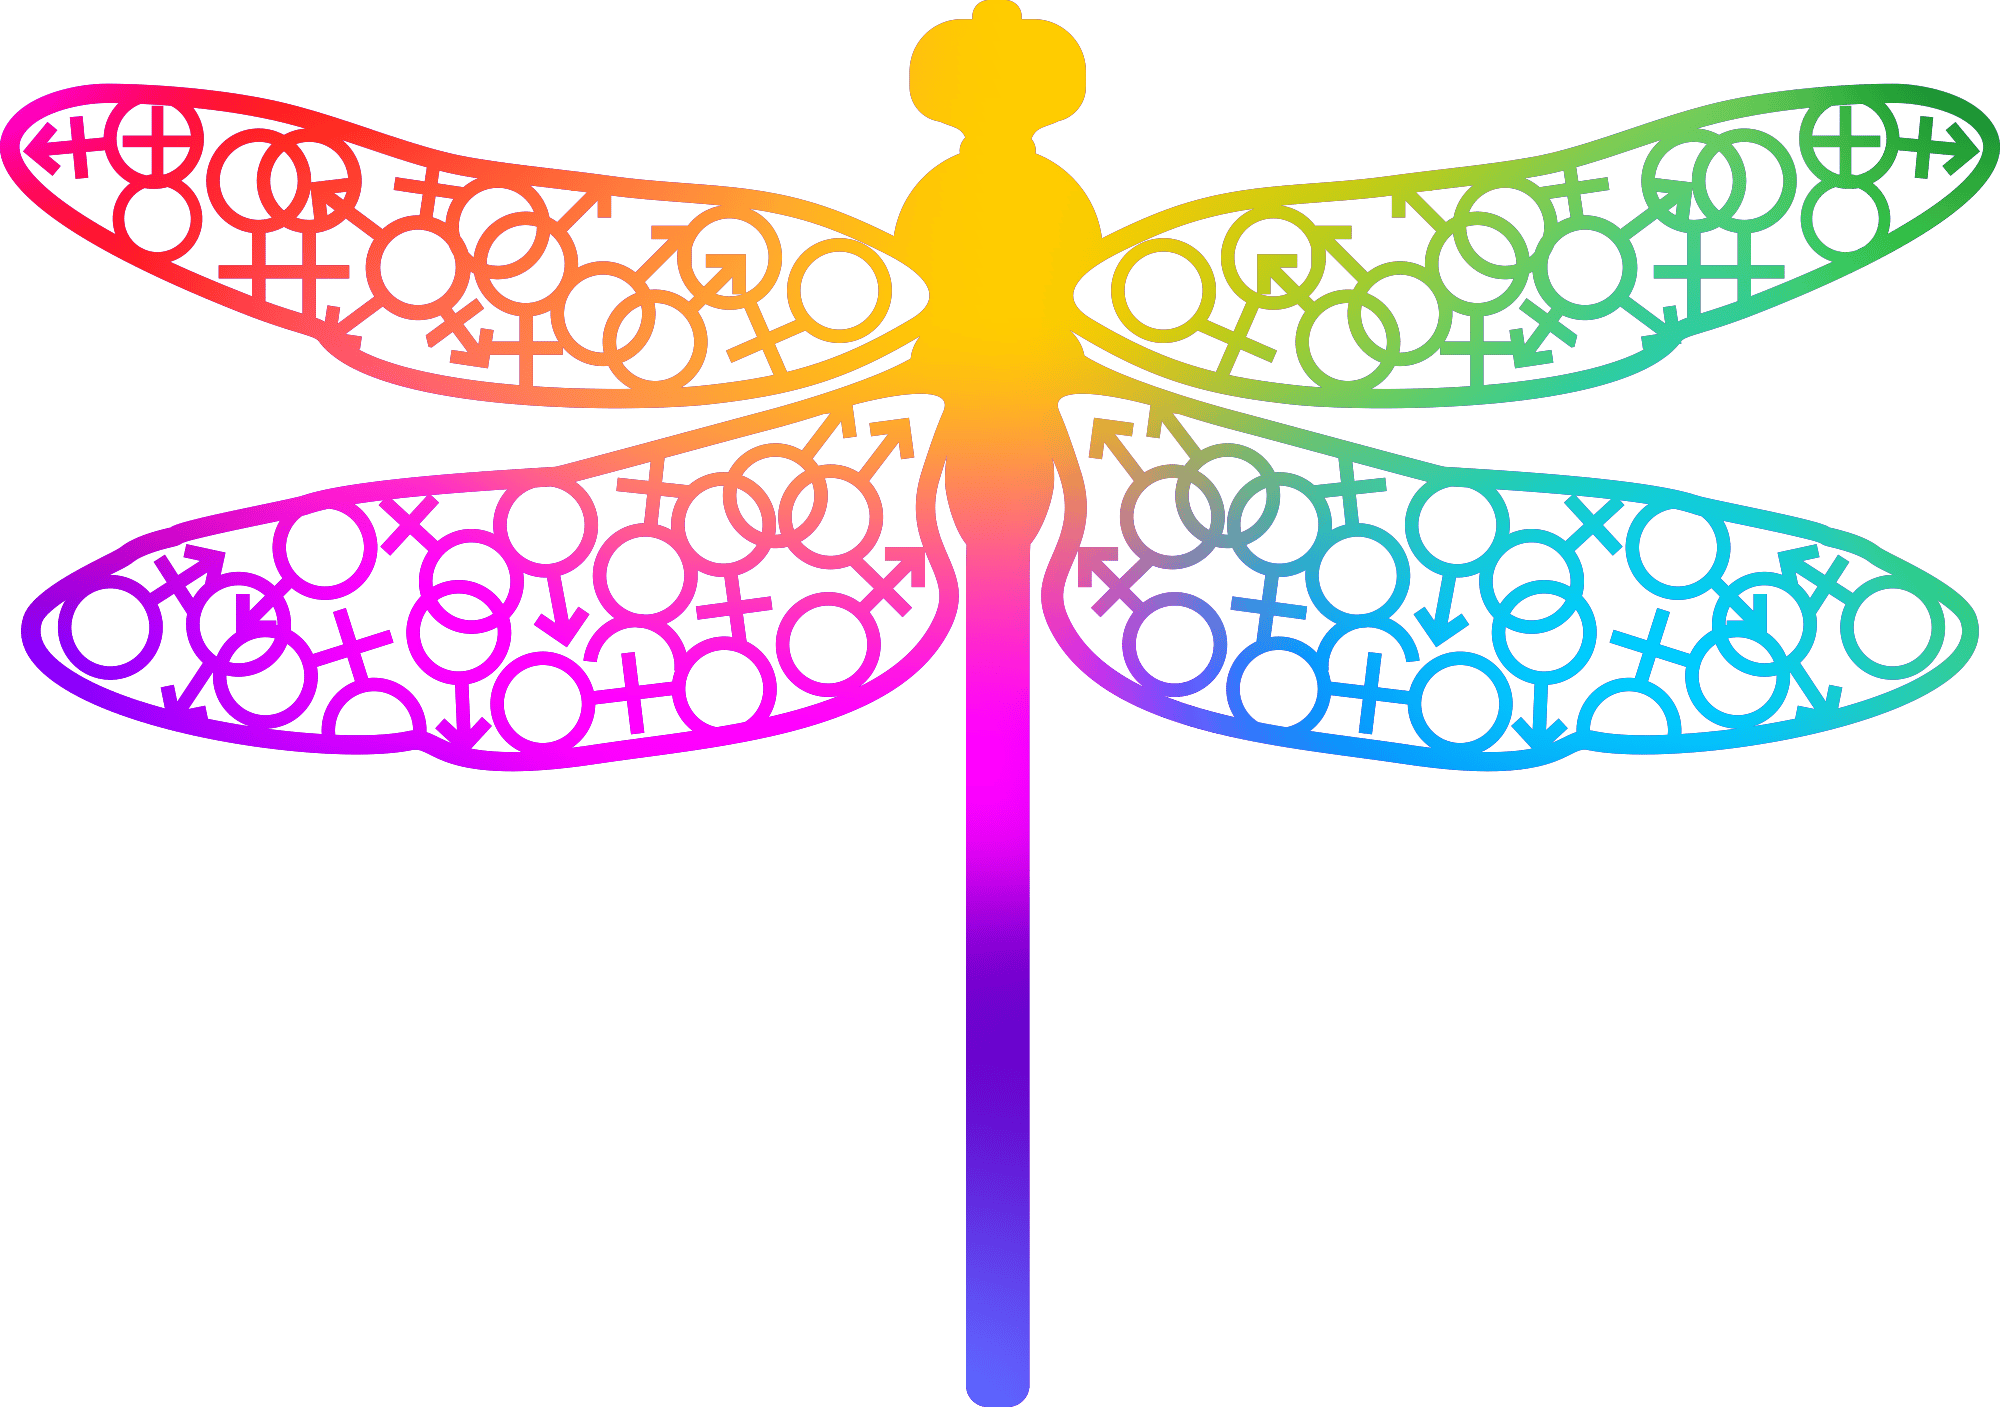 A colorful dragonfly silhouette filled with interconnected circles, displayed in gradient shades from red to purple.